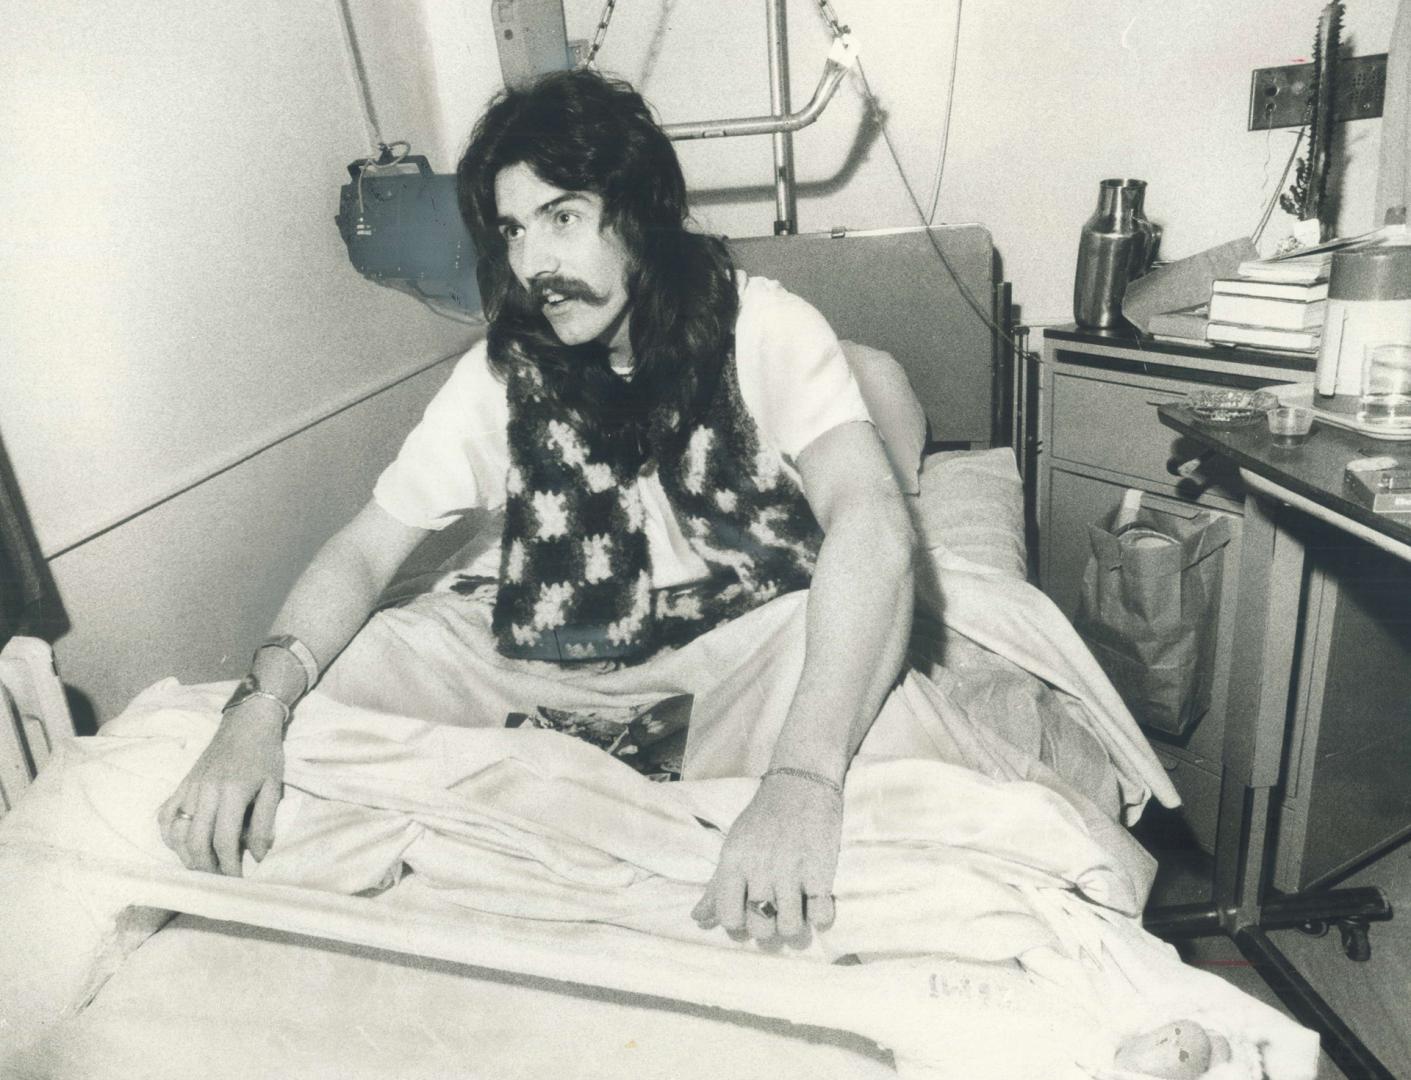 The Biggest Fear most people have before an operation is the fear of the unknown, says Toronto musician Don Yaskowich, who has lost count of the times he's been operated on since a motorcycle smash